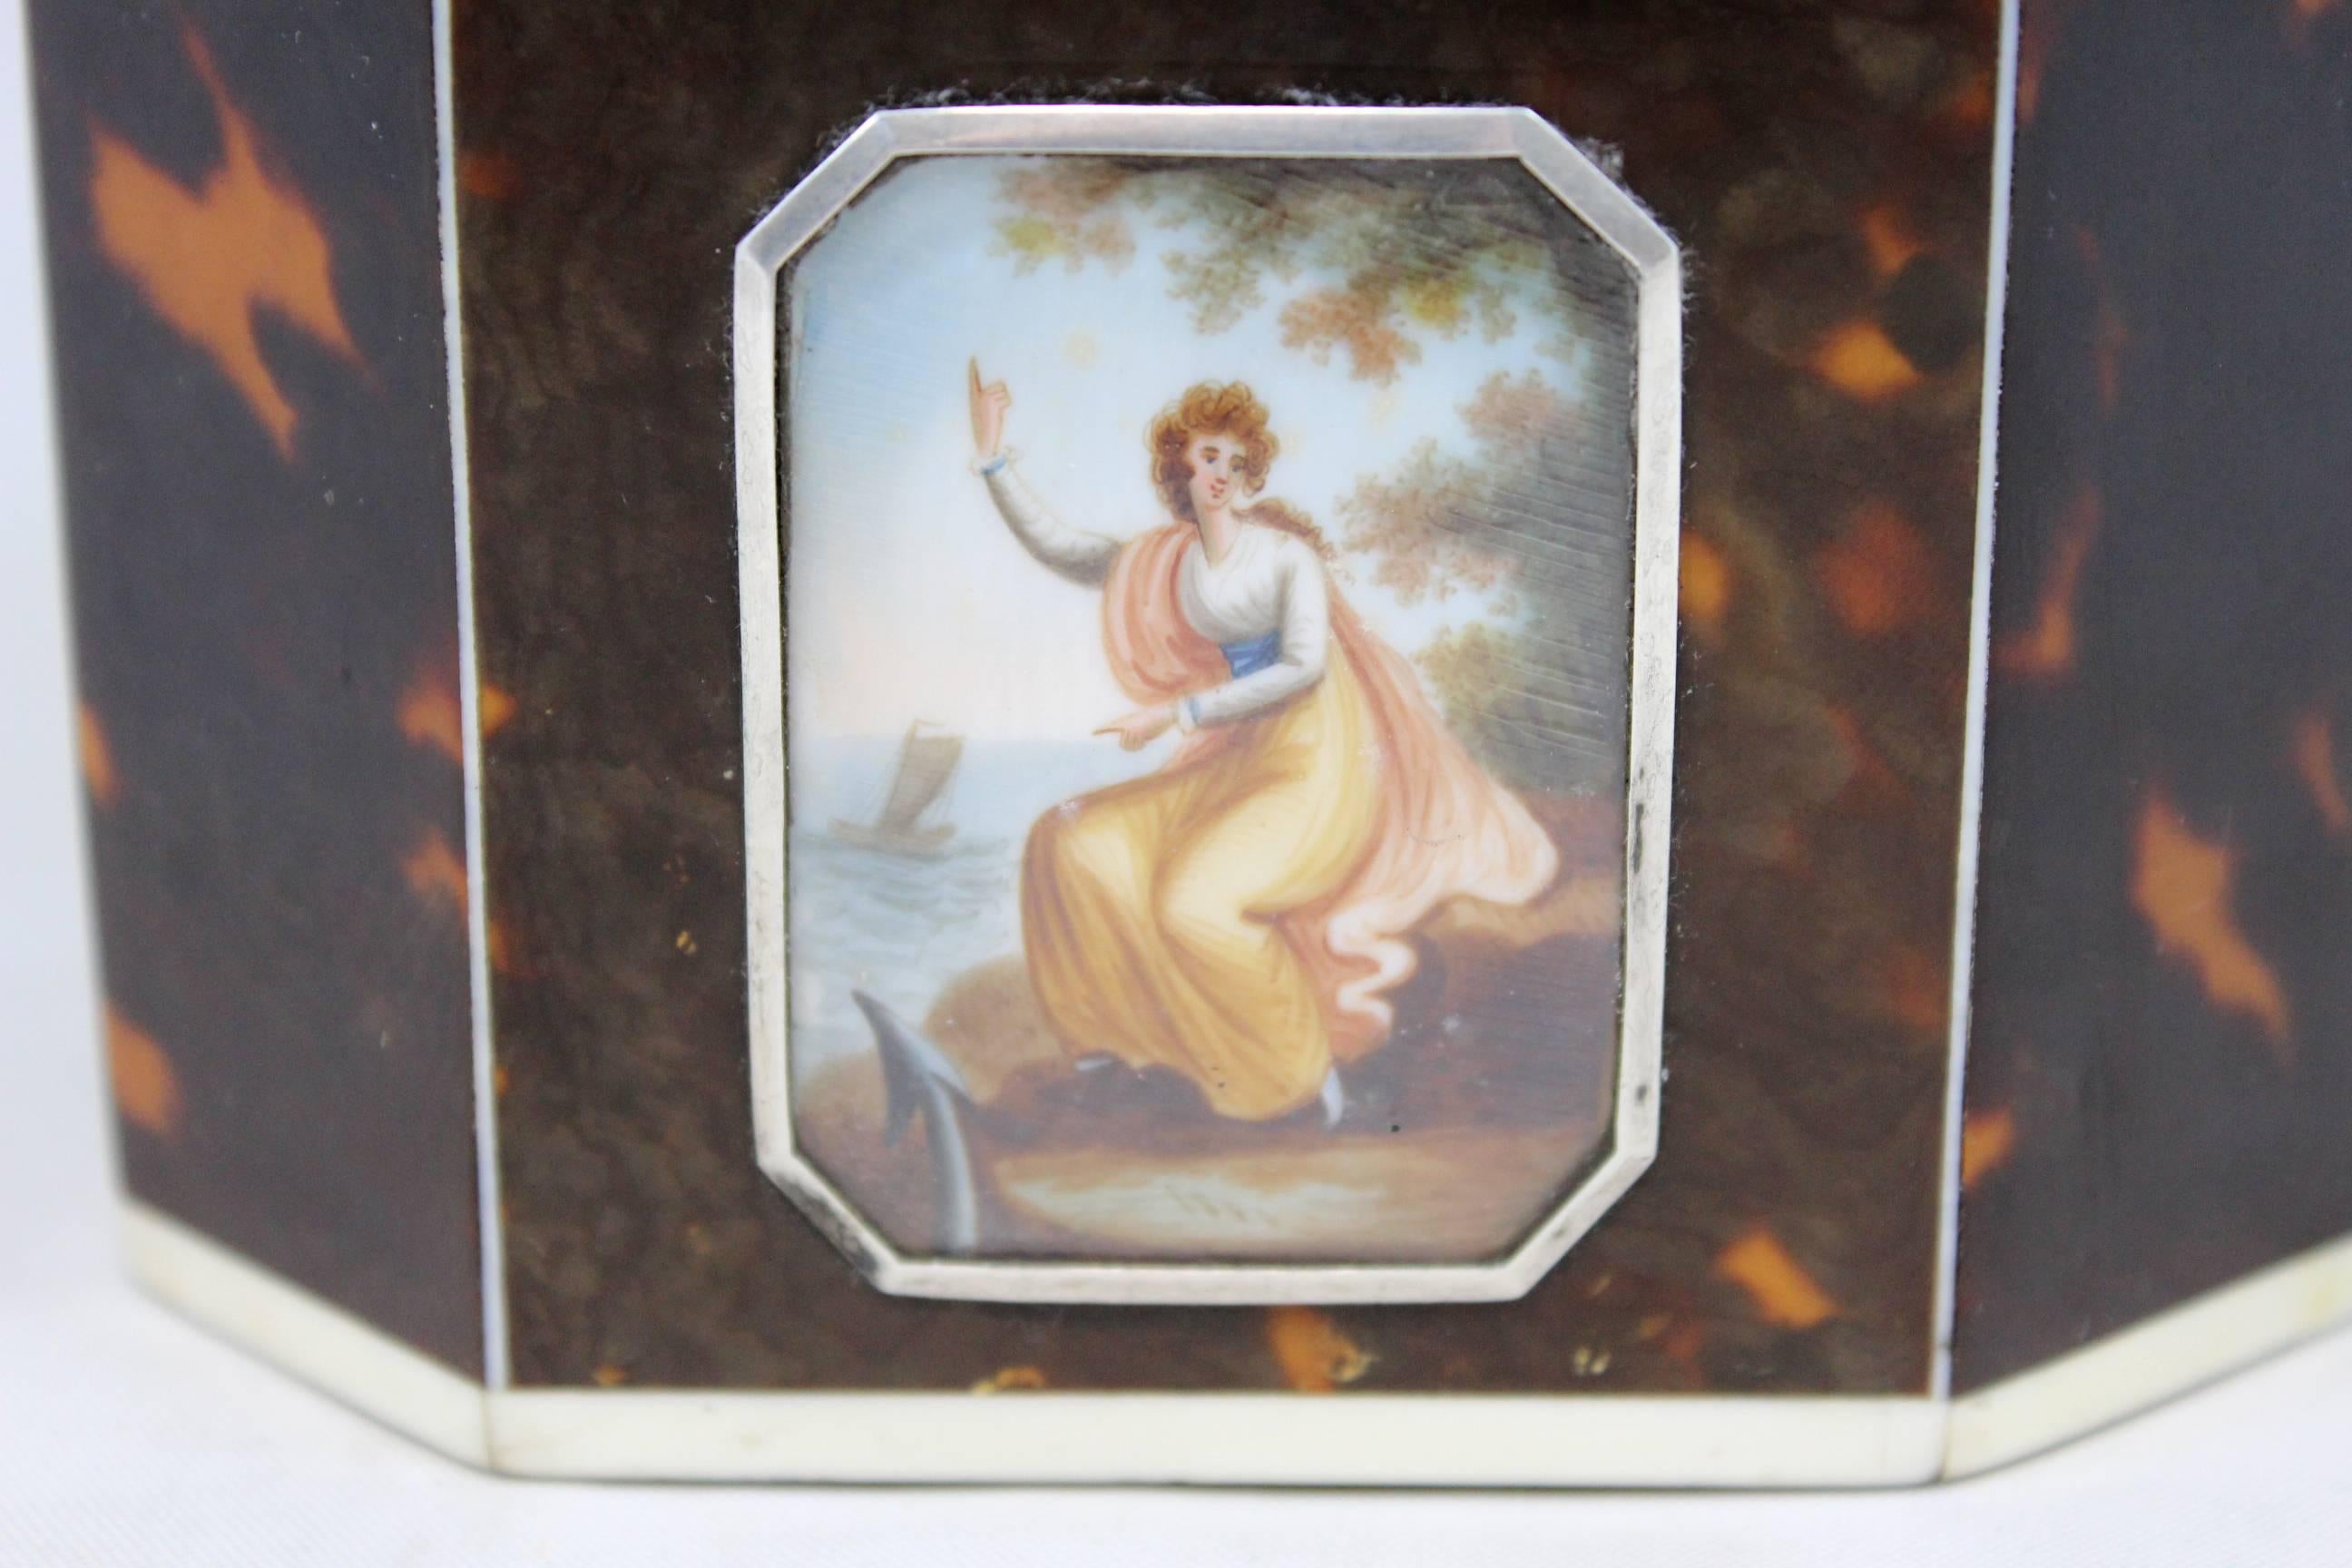 An exceptional quality late 18th century English octagonal tea caddy in tortoise shell with a reverse painted allegorical lozenge on the front. Excellent overall condition, with some interior lining losses.